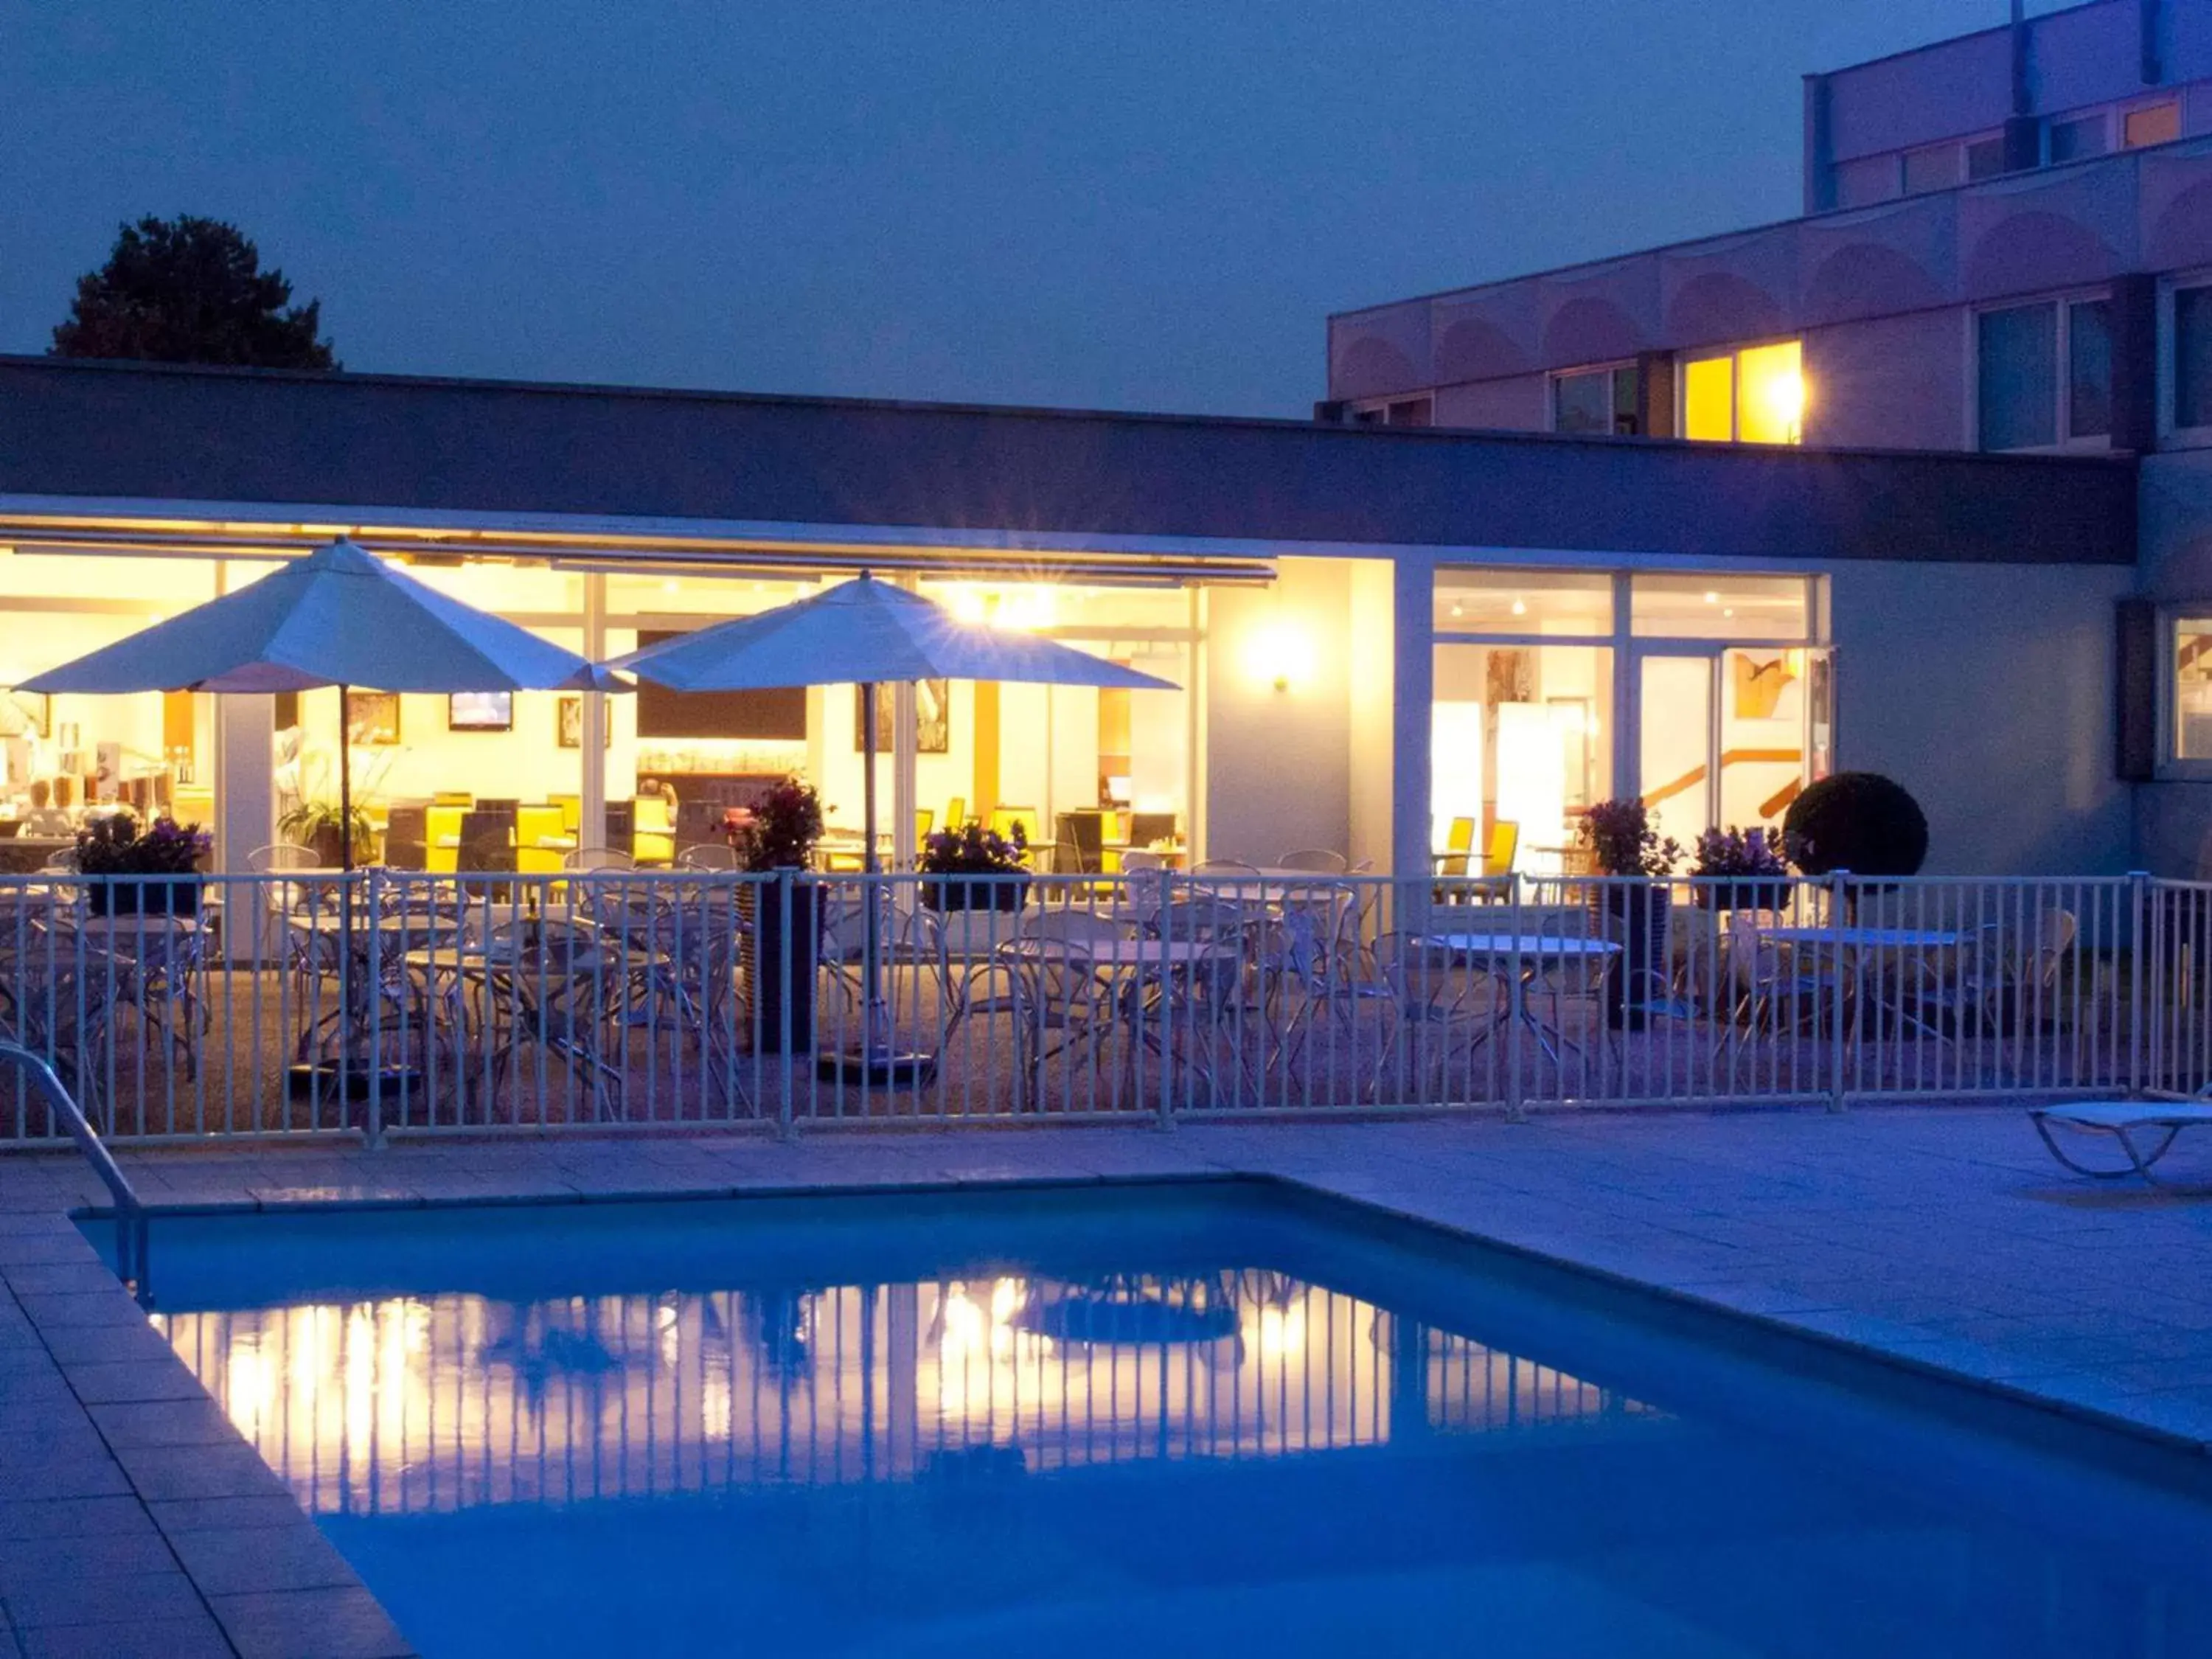 Property building, Swimming Pool in Novotel Mulhouse Bâle Fribourg